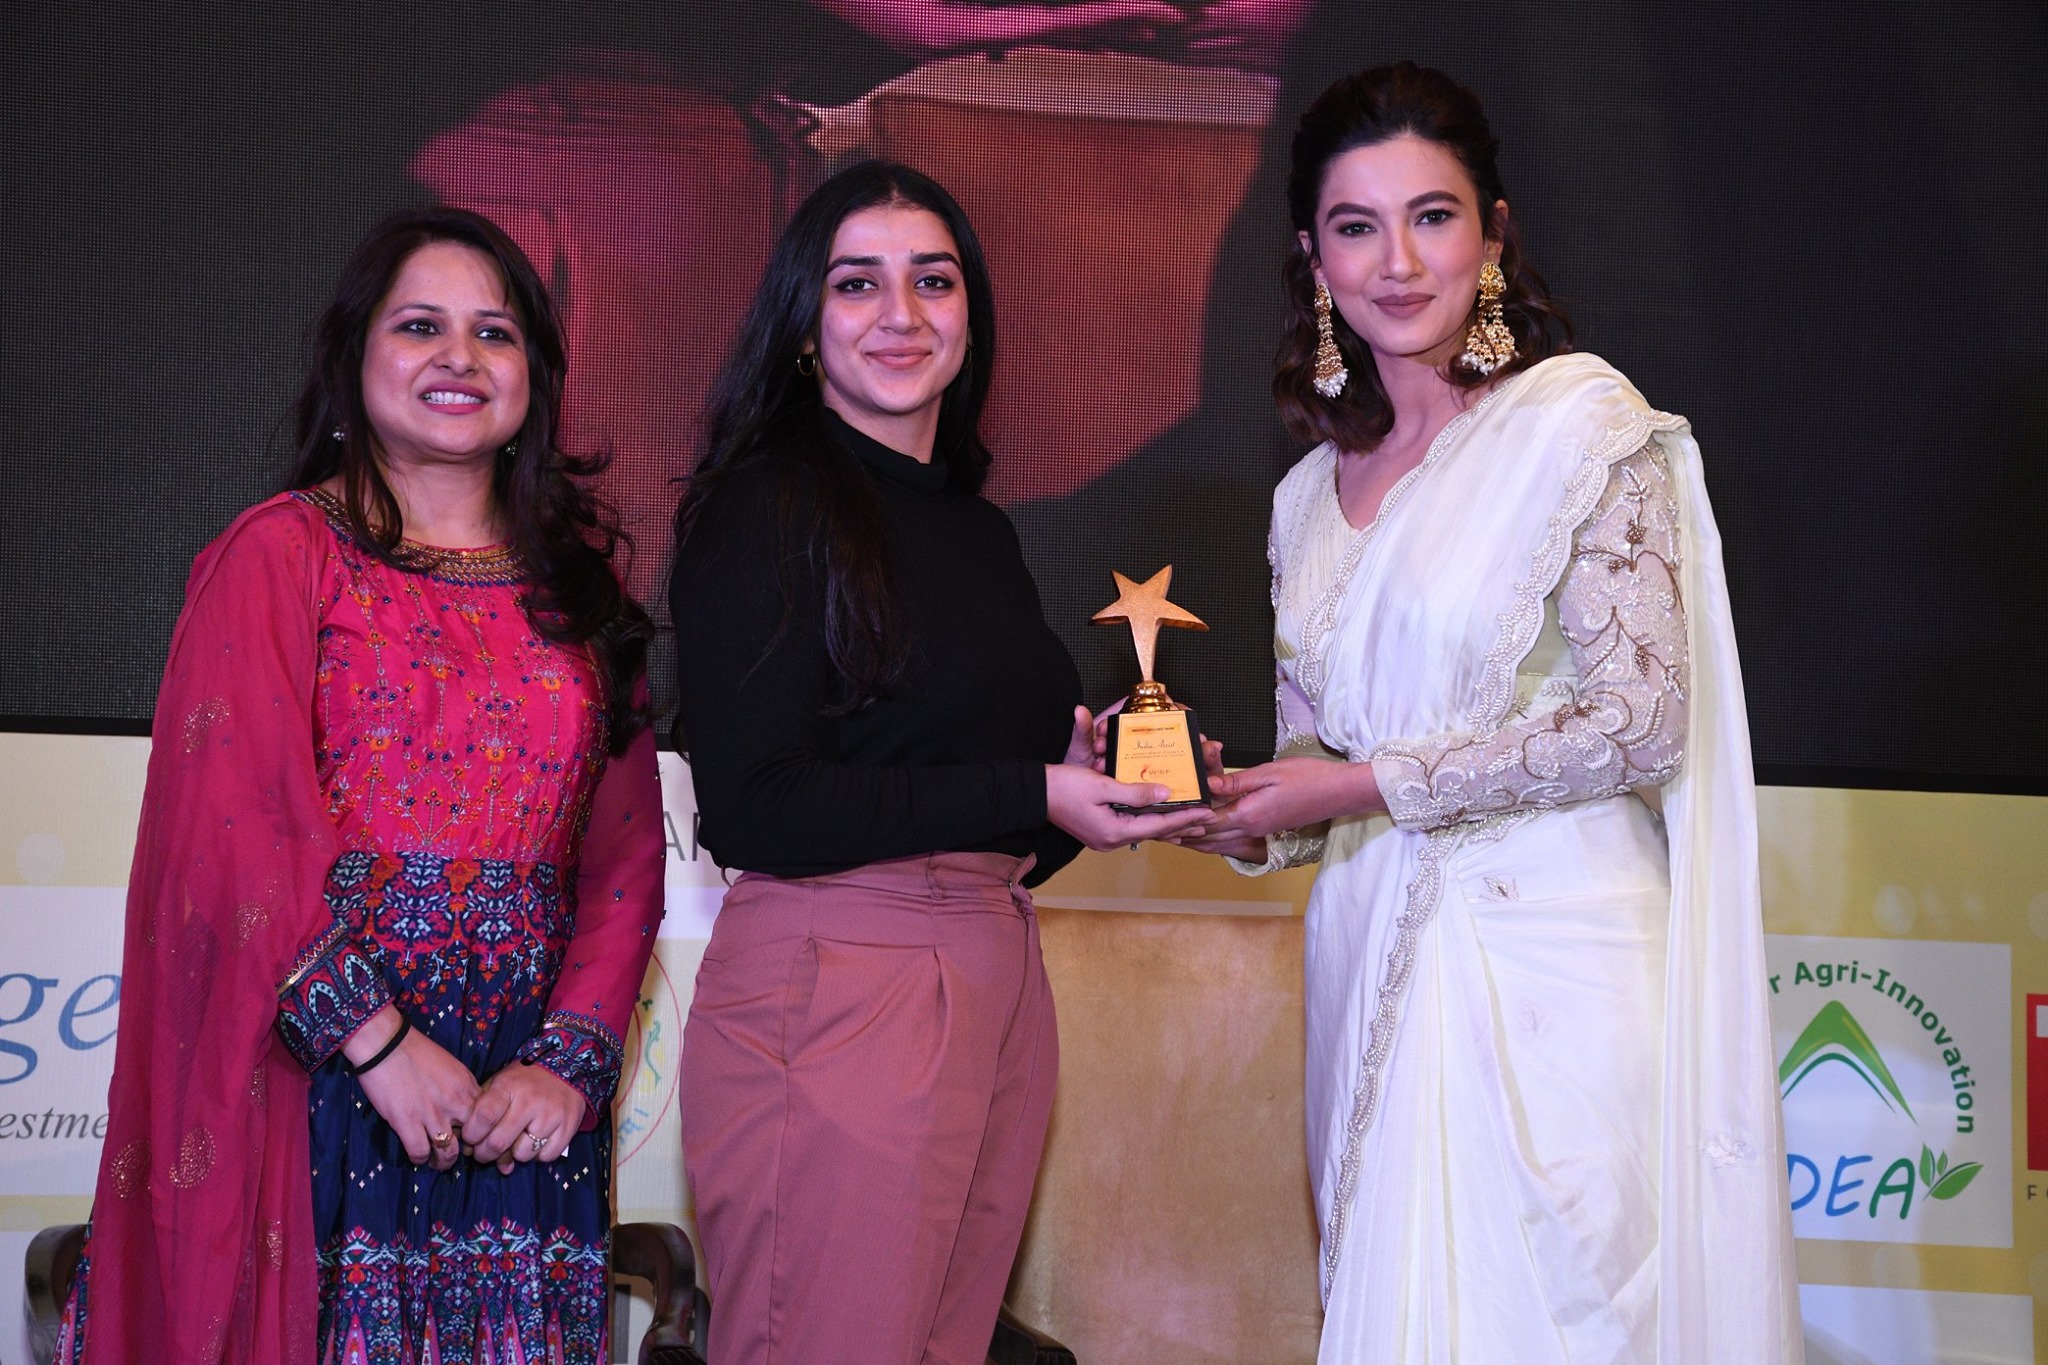 Press Release – India Assist awarded the Indian Women Excellence and Leadership Award by the Women Innovation Entrepreneurship Foundation